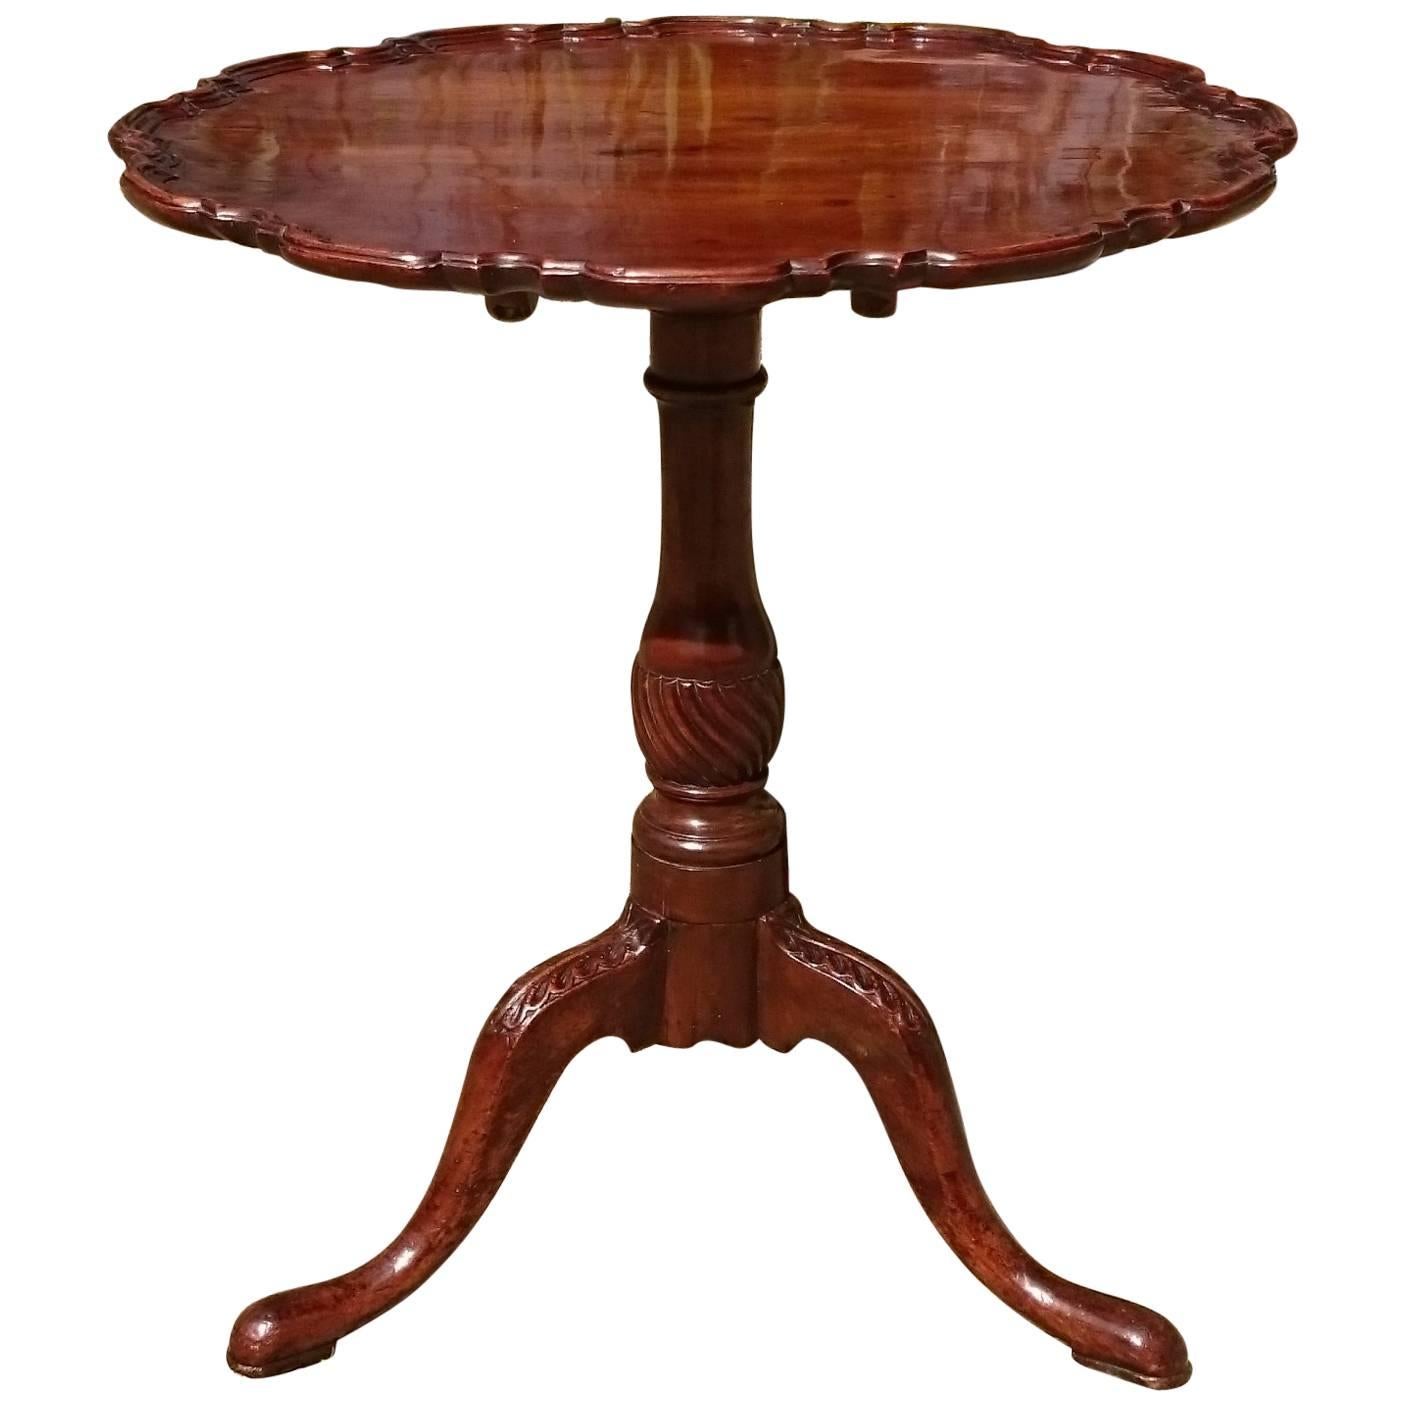 Important 19th Century Victorian Mahogany Wine Table after Thomas Chippendale